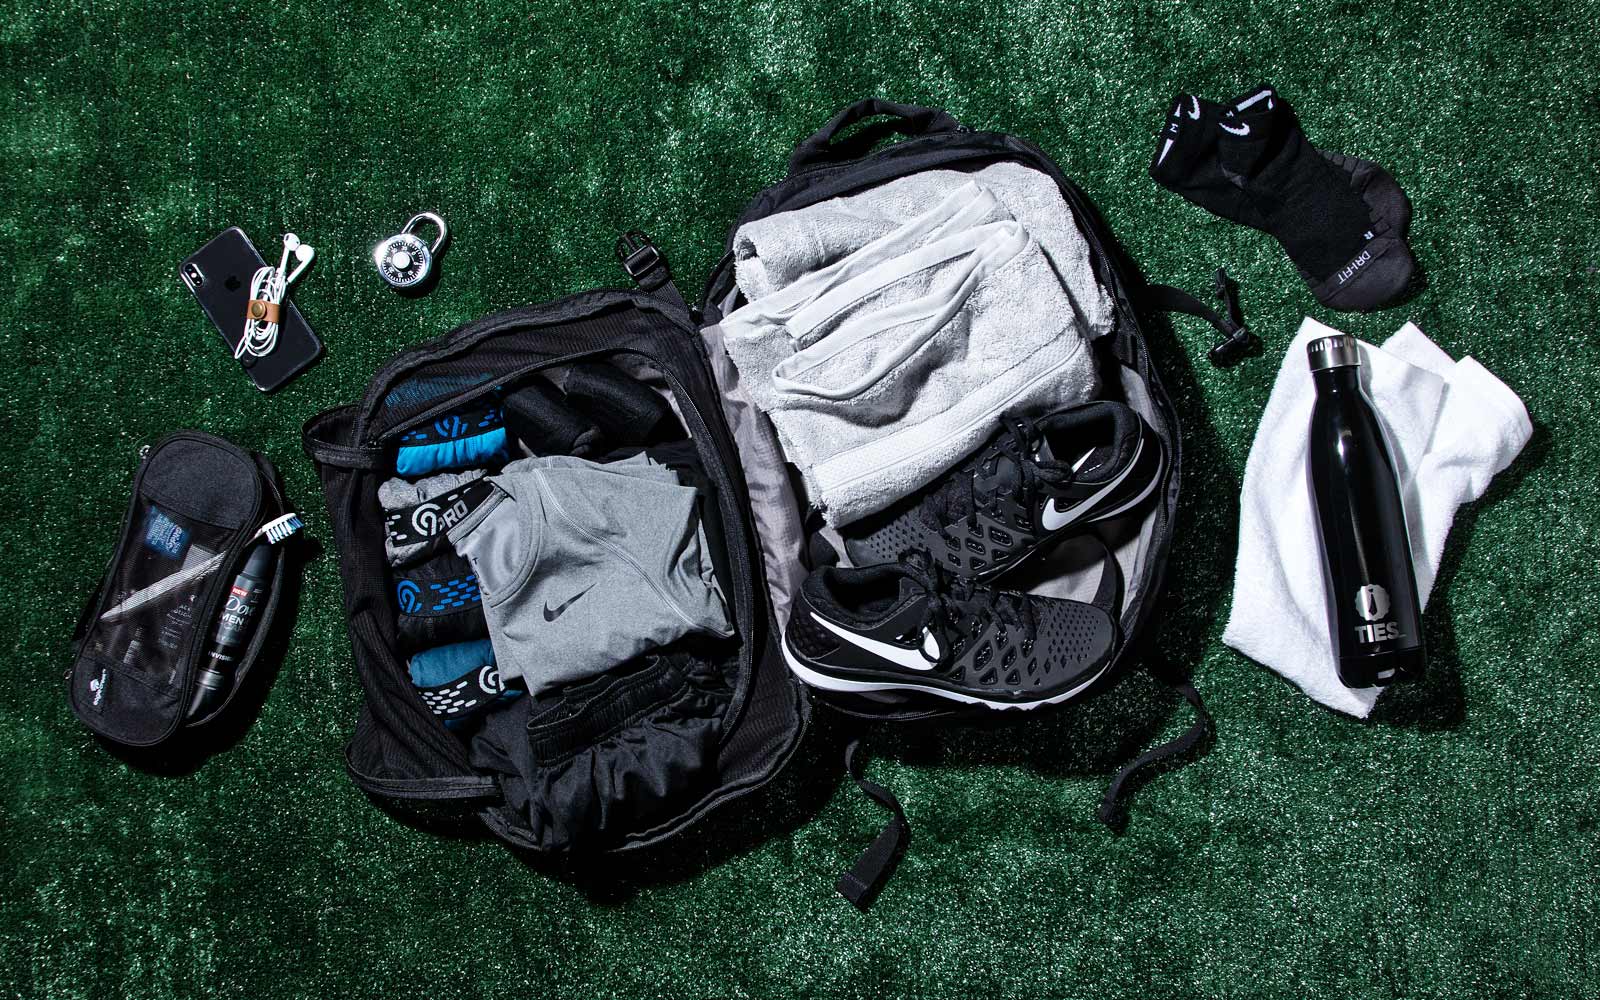 Workout Essentials: What to Pack for the Gym - The GentleManual